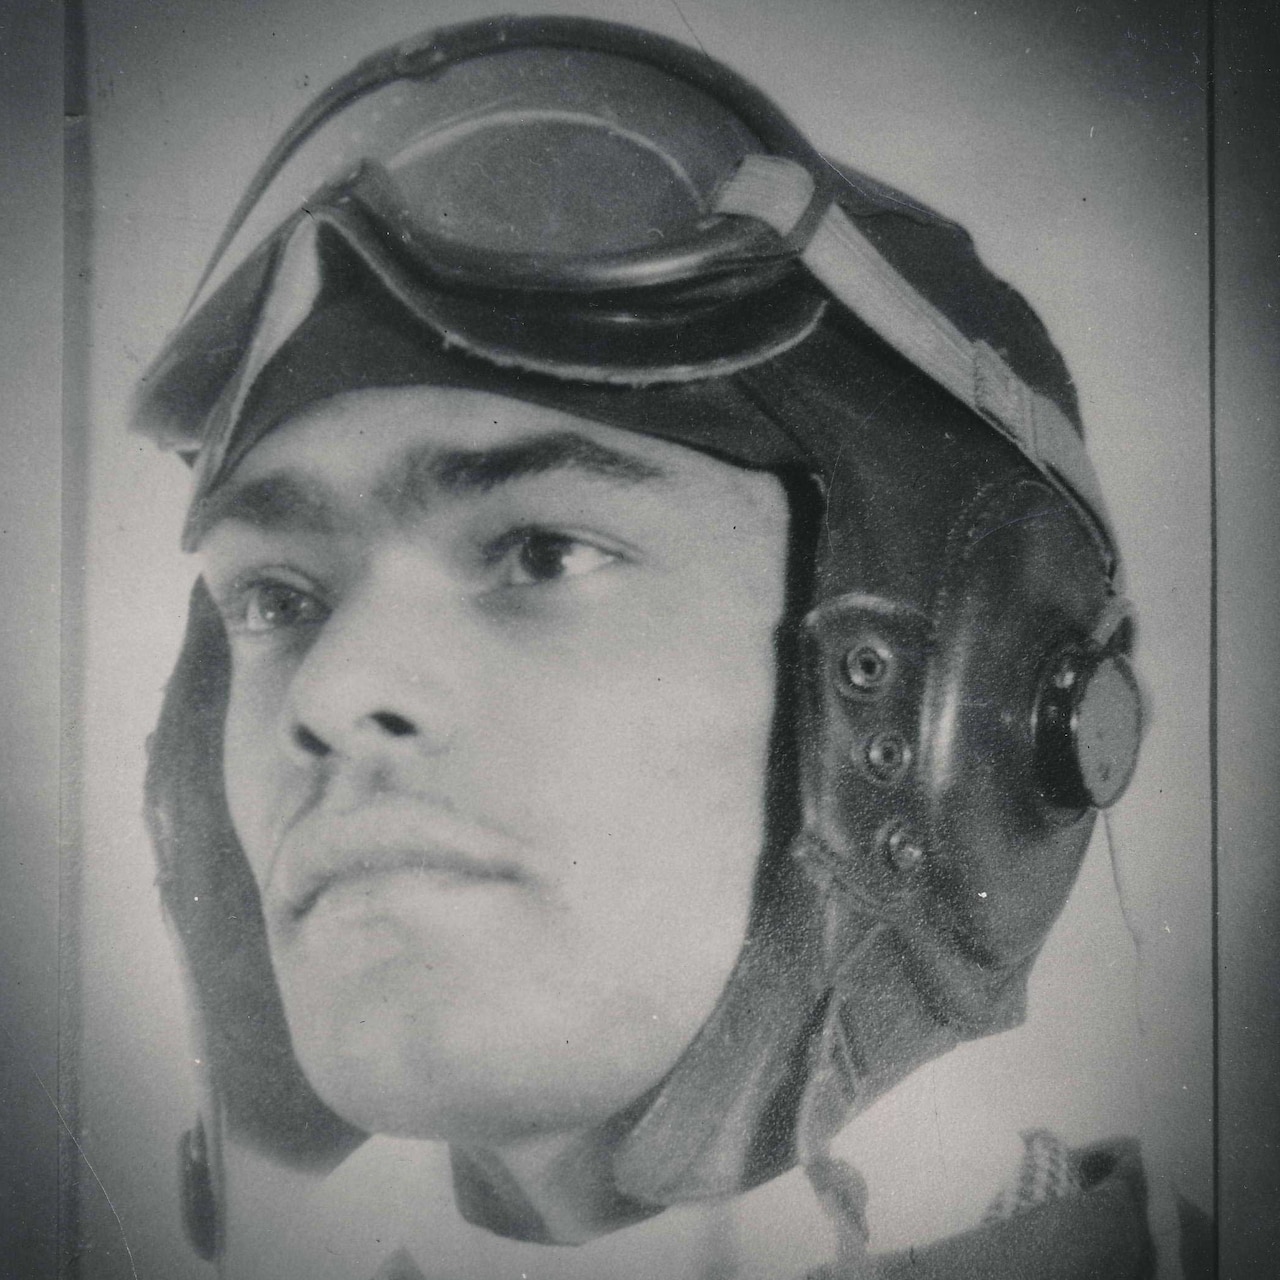 Franklin Macon poses for his official portrait as a Tuskegee Airman